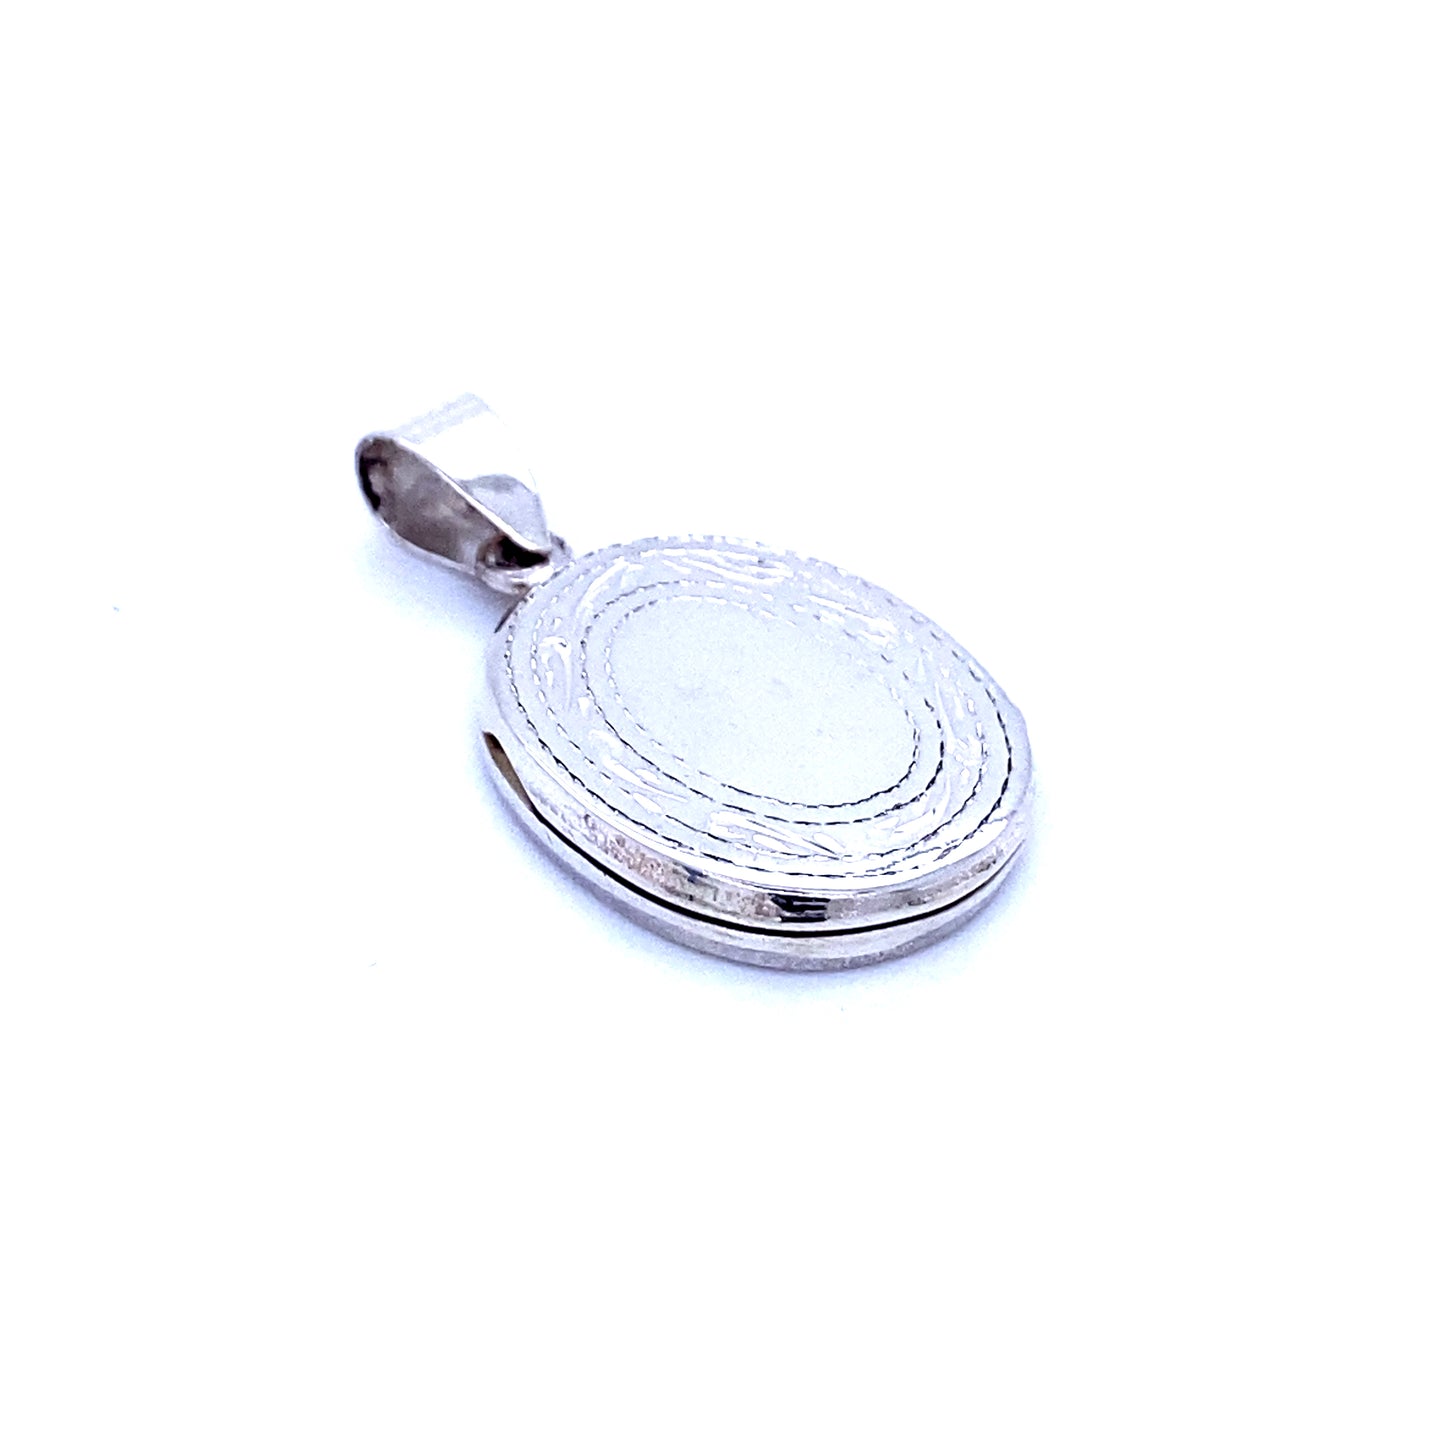 A Victorian era silver oval locket pendant with an etched border on a white background.